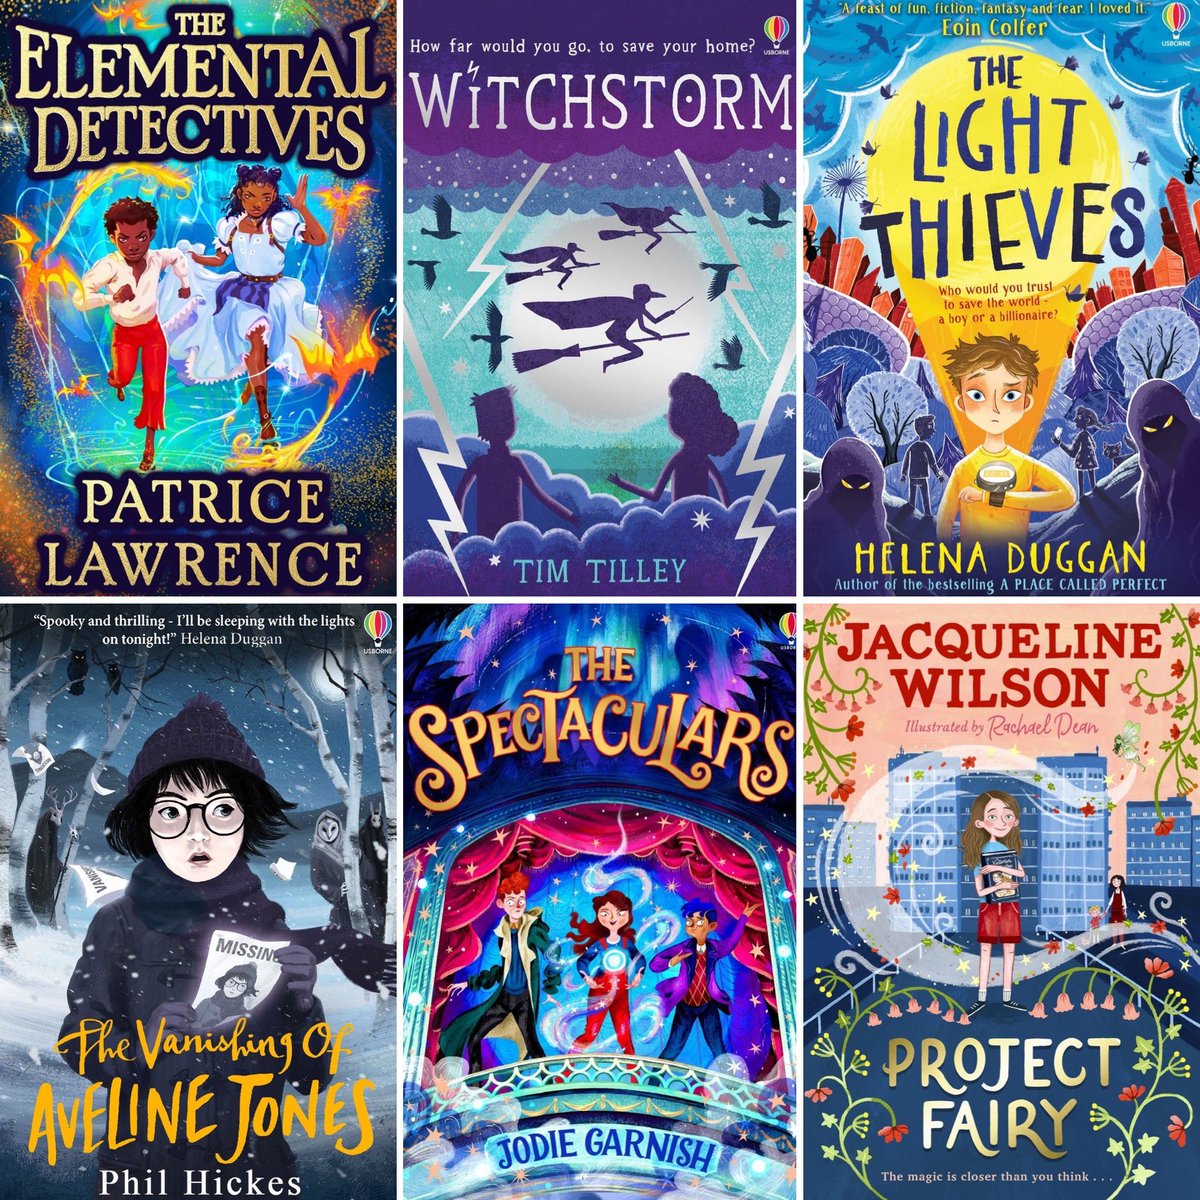 ✨ THE ELEMENTAL DETECTIVES @LawrencePatrice 🌿 WITCHSTORM @timbertilley ✨ THE LIGHT THIEVES @Heldideas 🌿 THE VANISHING OF AVELINE JONES @Hickesy @RobinsonKH ✨ THE SPECTACULARS @JodieGarnish 🌿 PROJECT FAIRY #JacquelineWilson